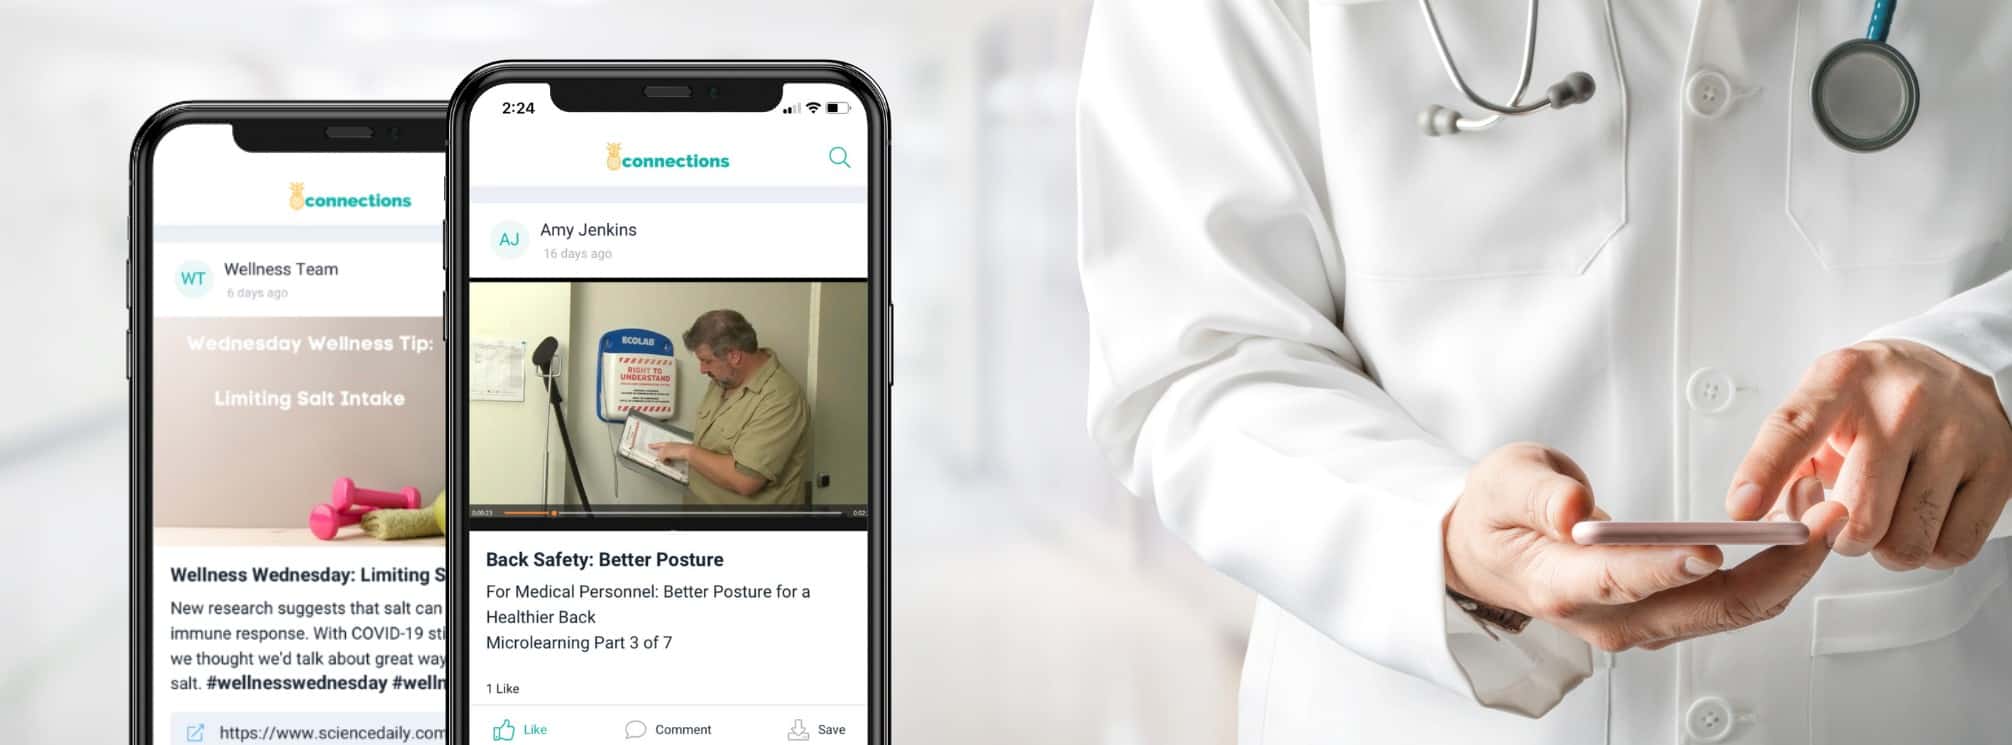 two phones showing theEMPLOYEEapp's news feed over a picture of a doctor using their phone in the hospital